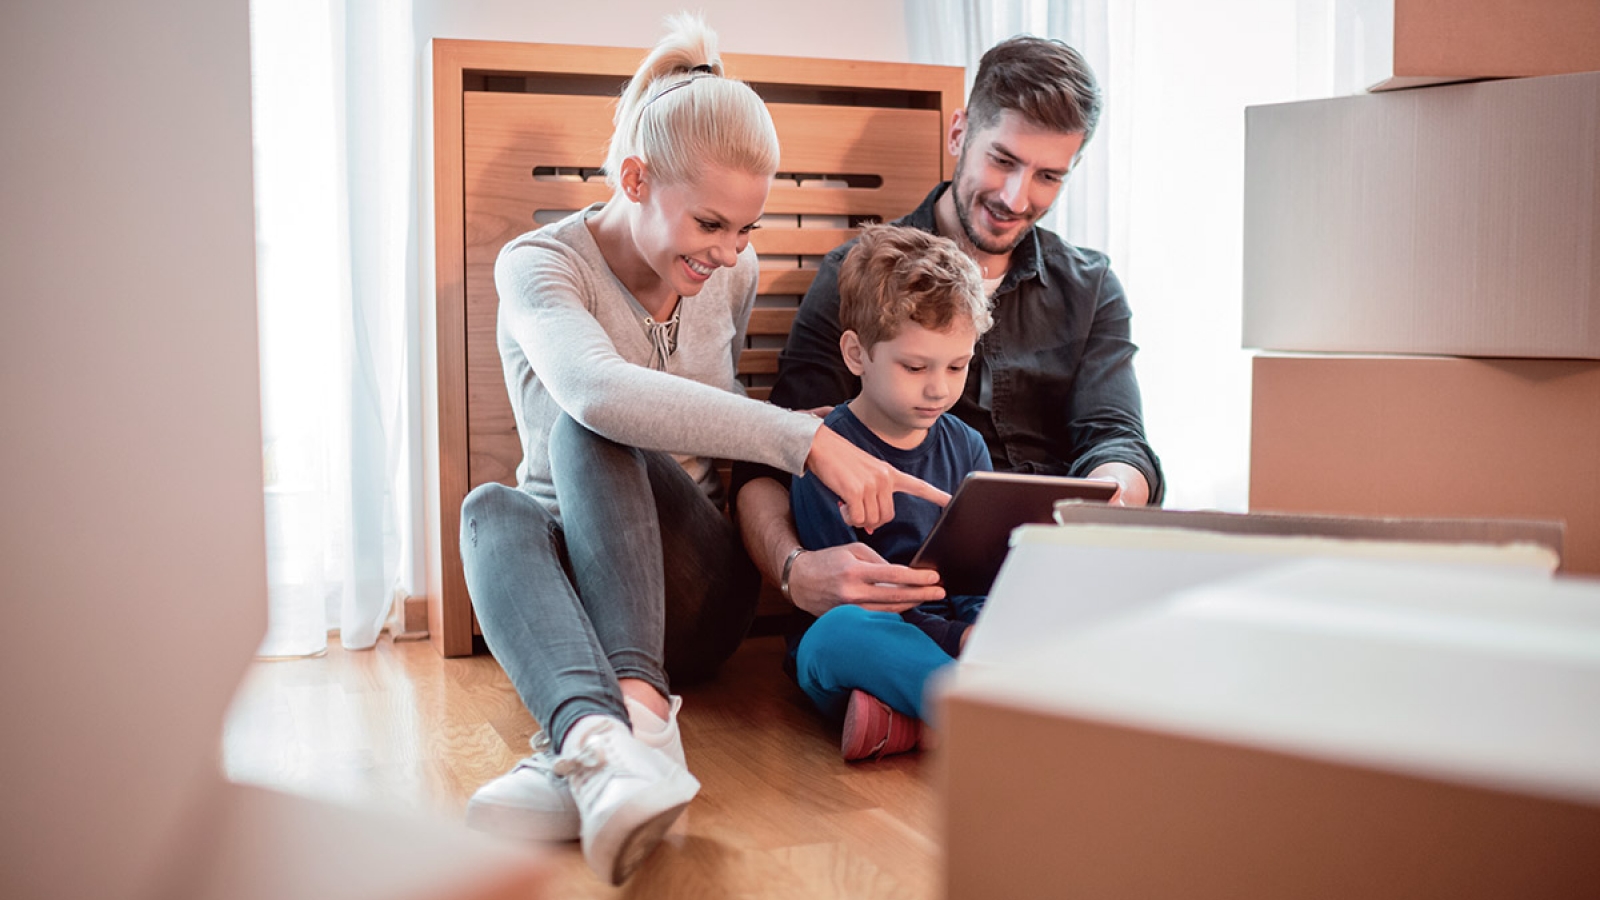 a family sitting on a hardwood floor with boxes around looking at a tablet